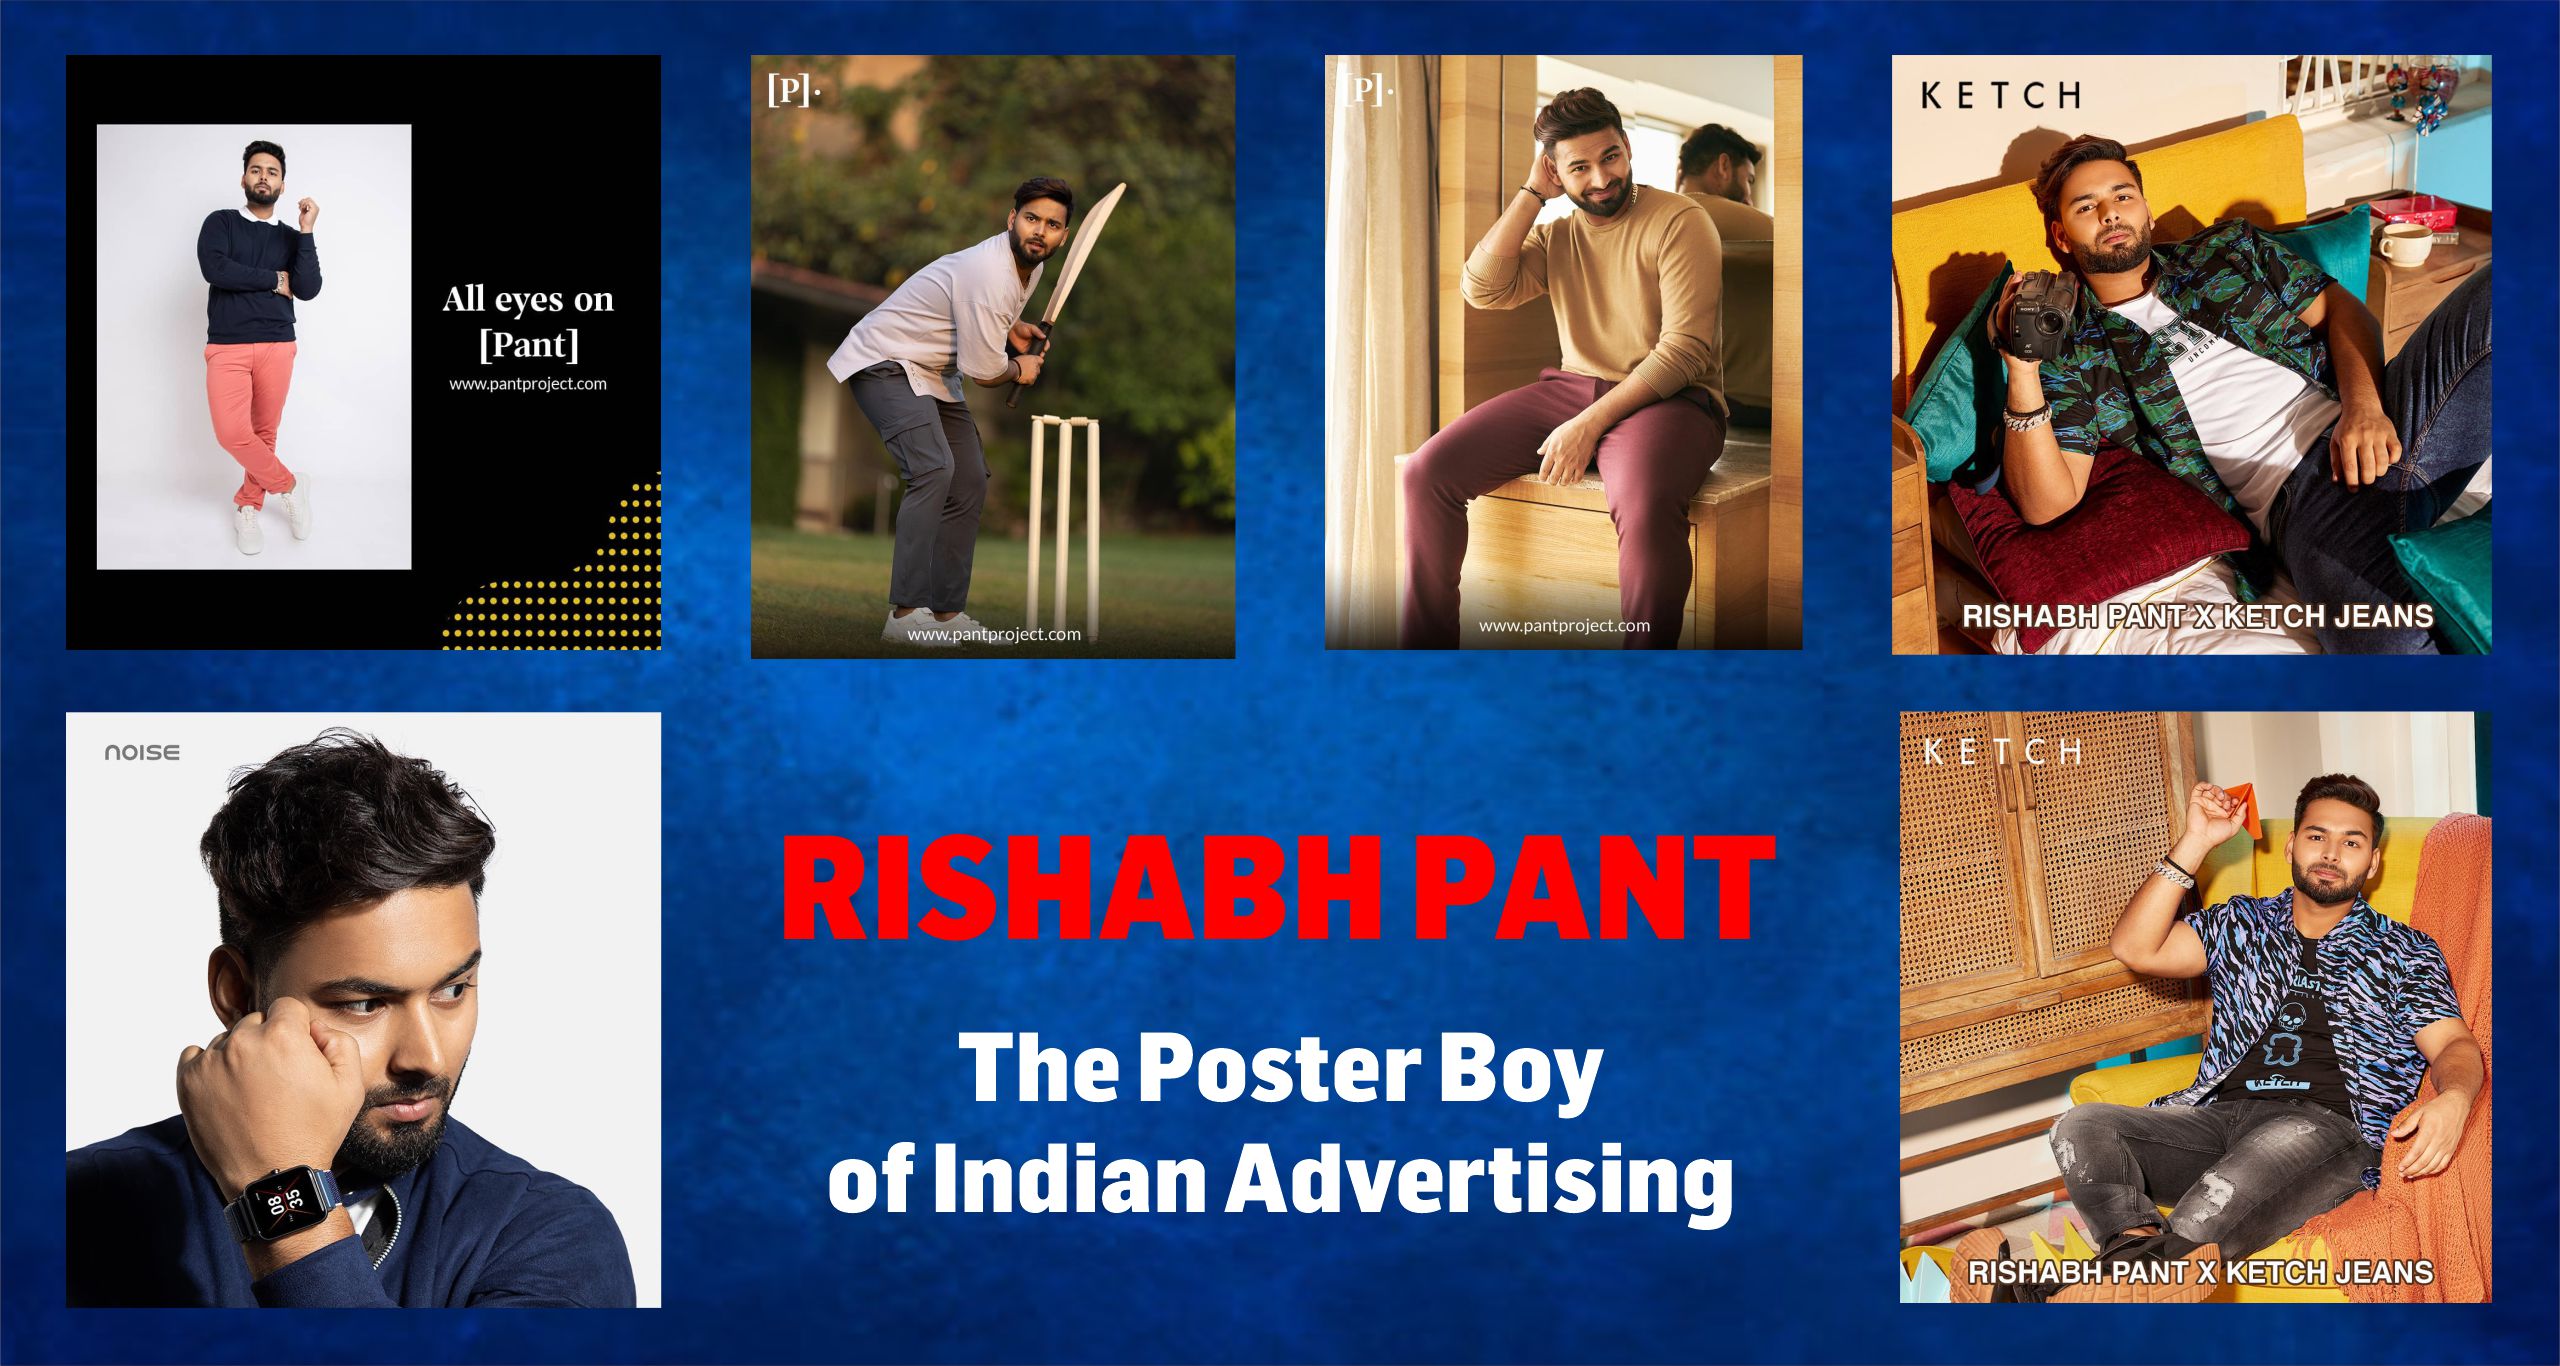 Rishabh Pant: The Poster Boy of Indian Advertising